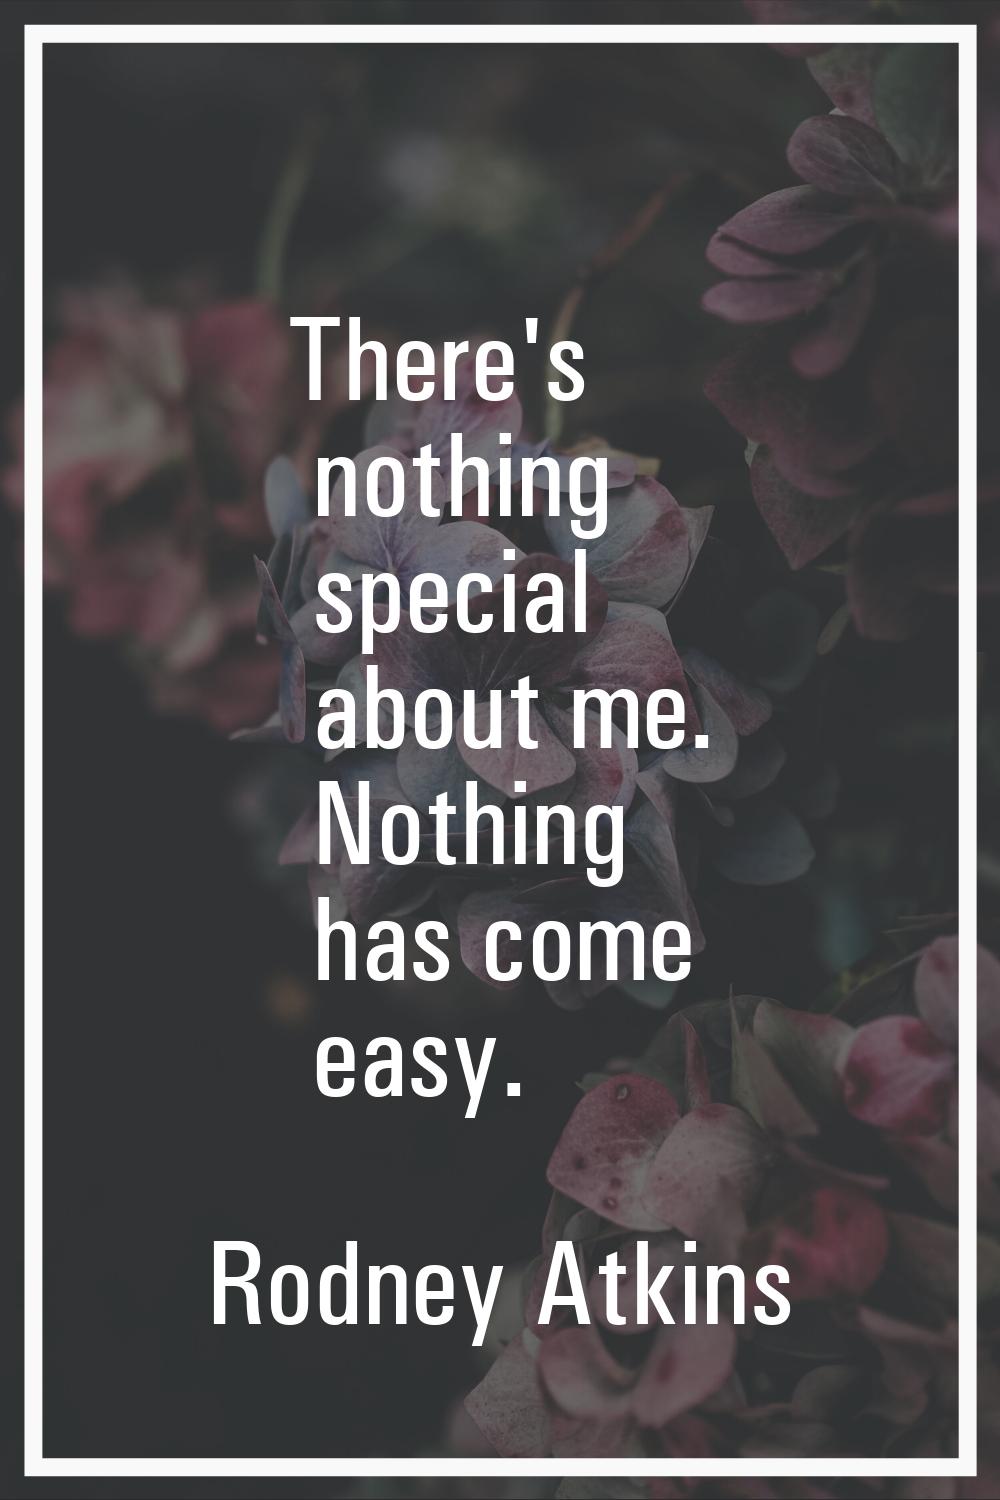 There's nothing special about me. Nothing has come easy.